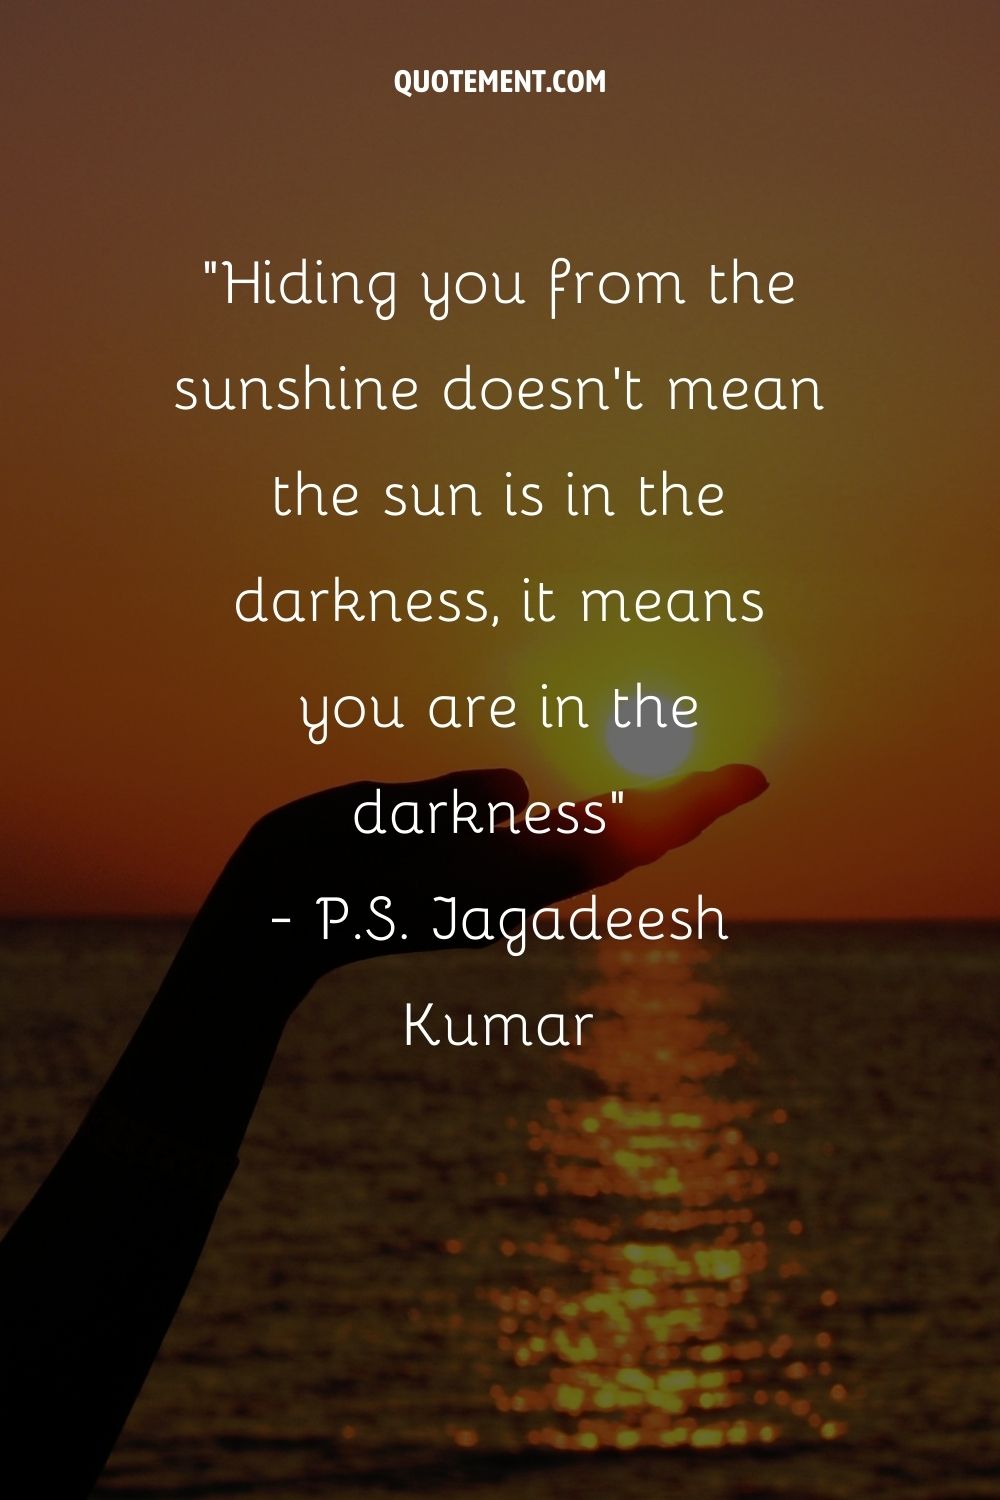 Hiding you from the sunshine doesn't mean the sun is in the darkness, it means you are in the darkness